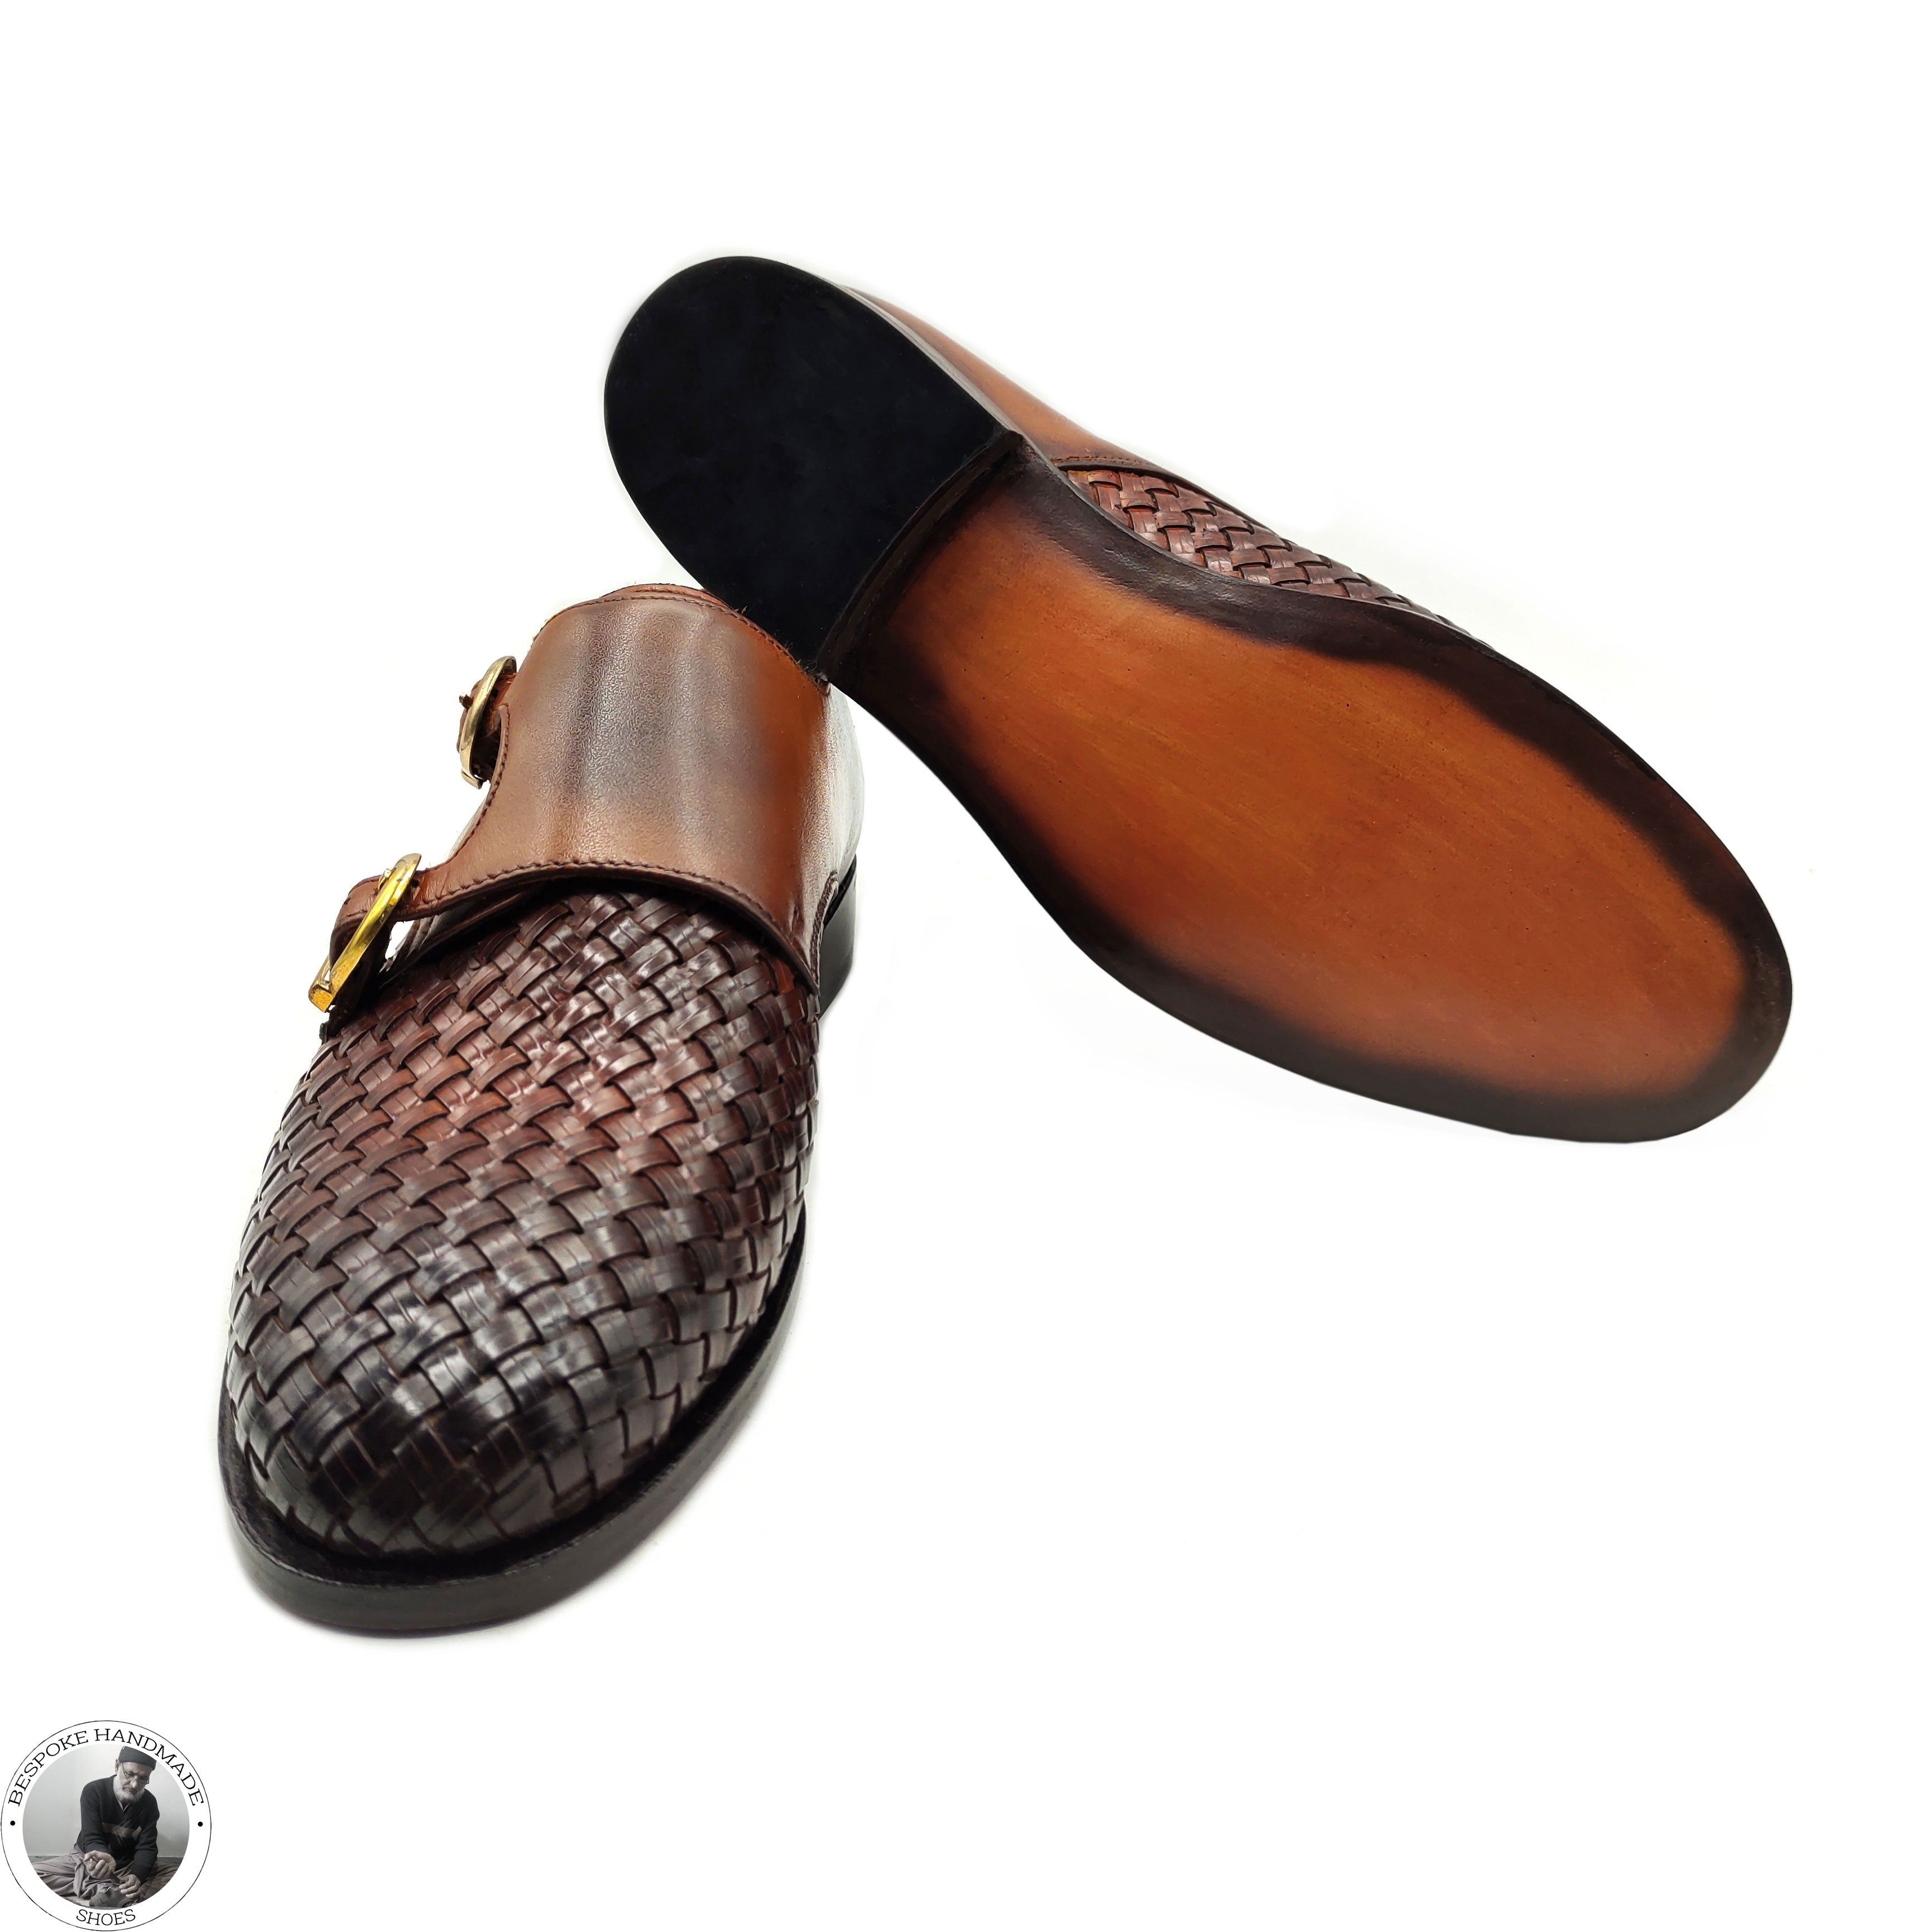 Bespoke Handmade Dress Woven Leather Shoes For Men's,Double Monk Strap Derby Casual Shoes